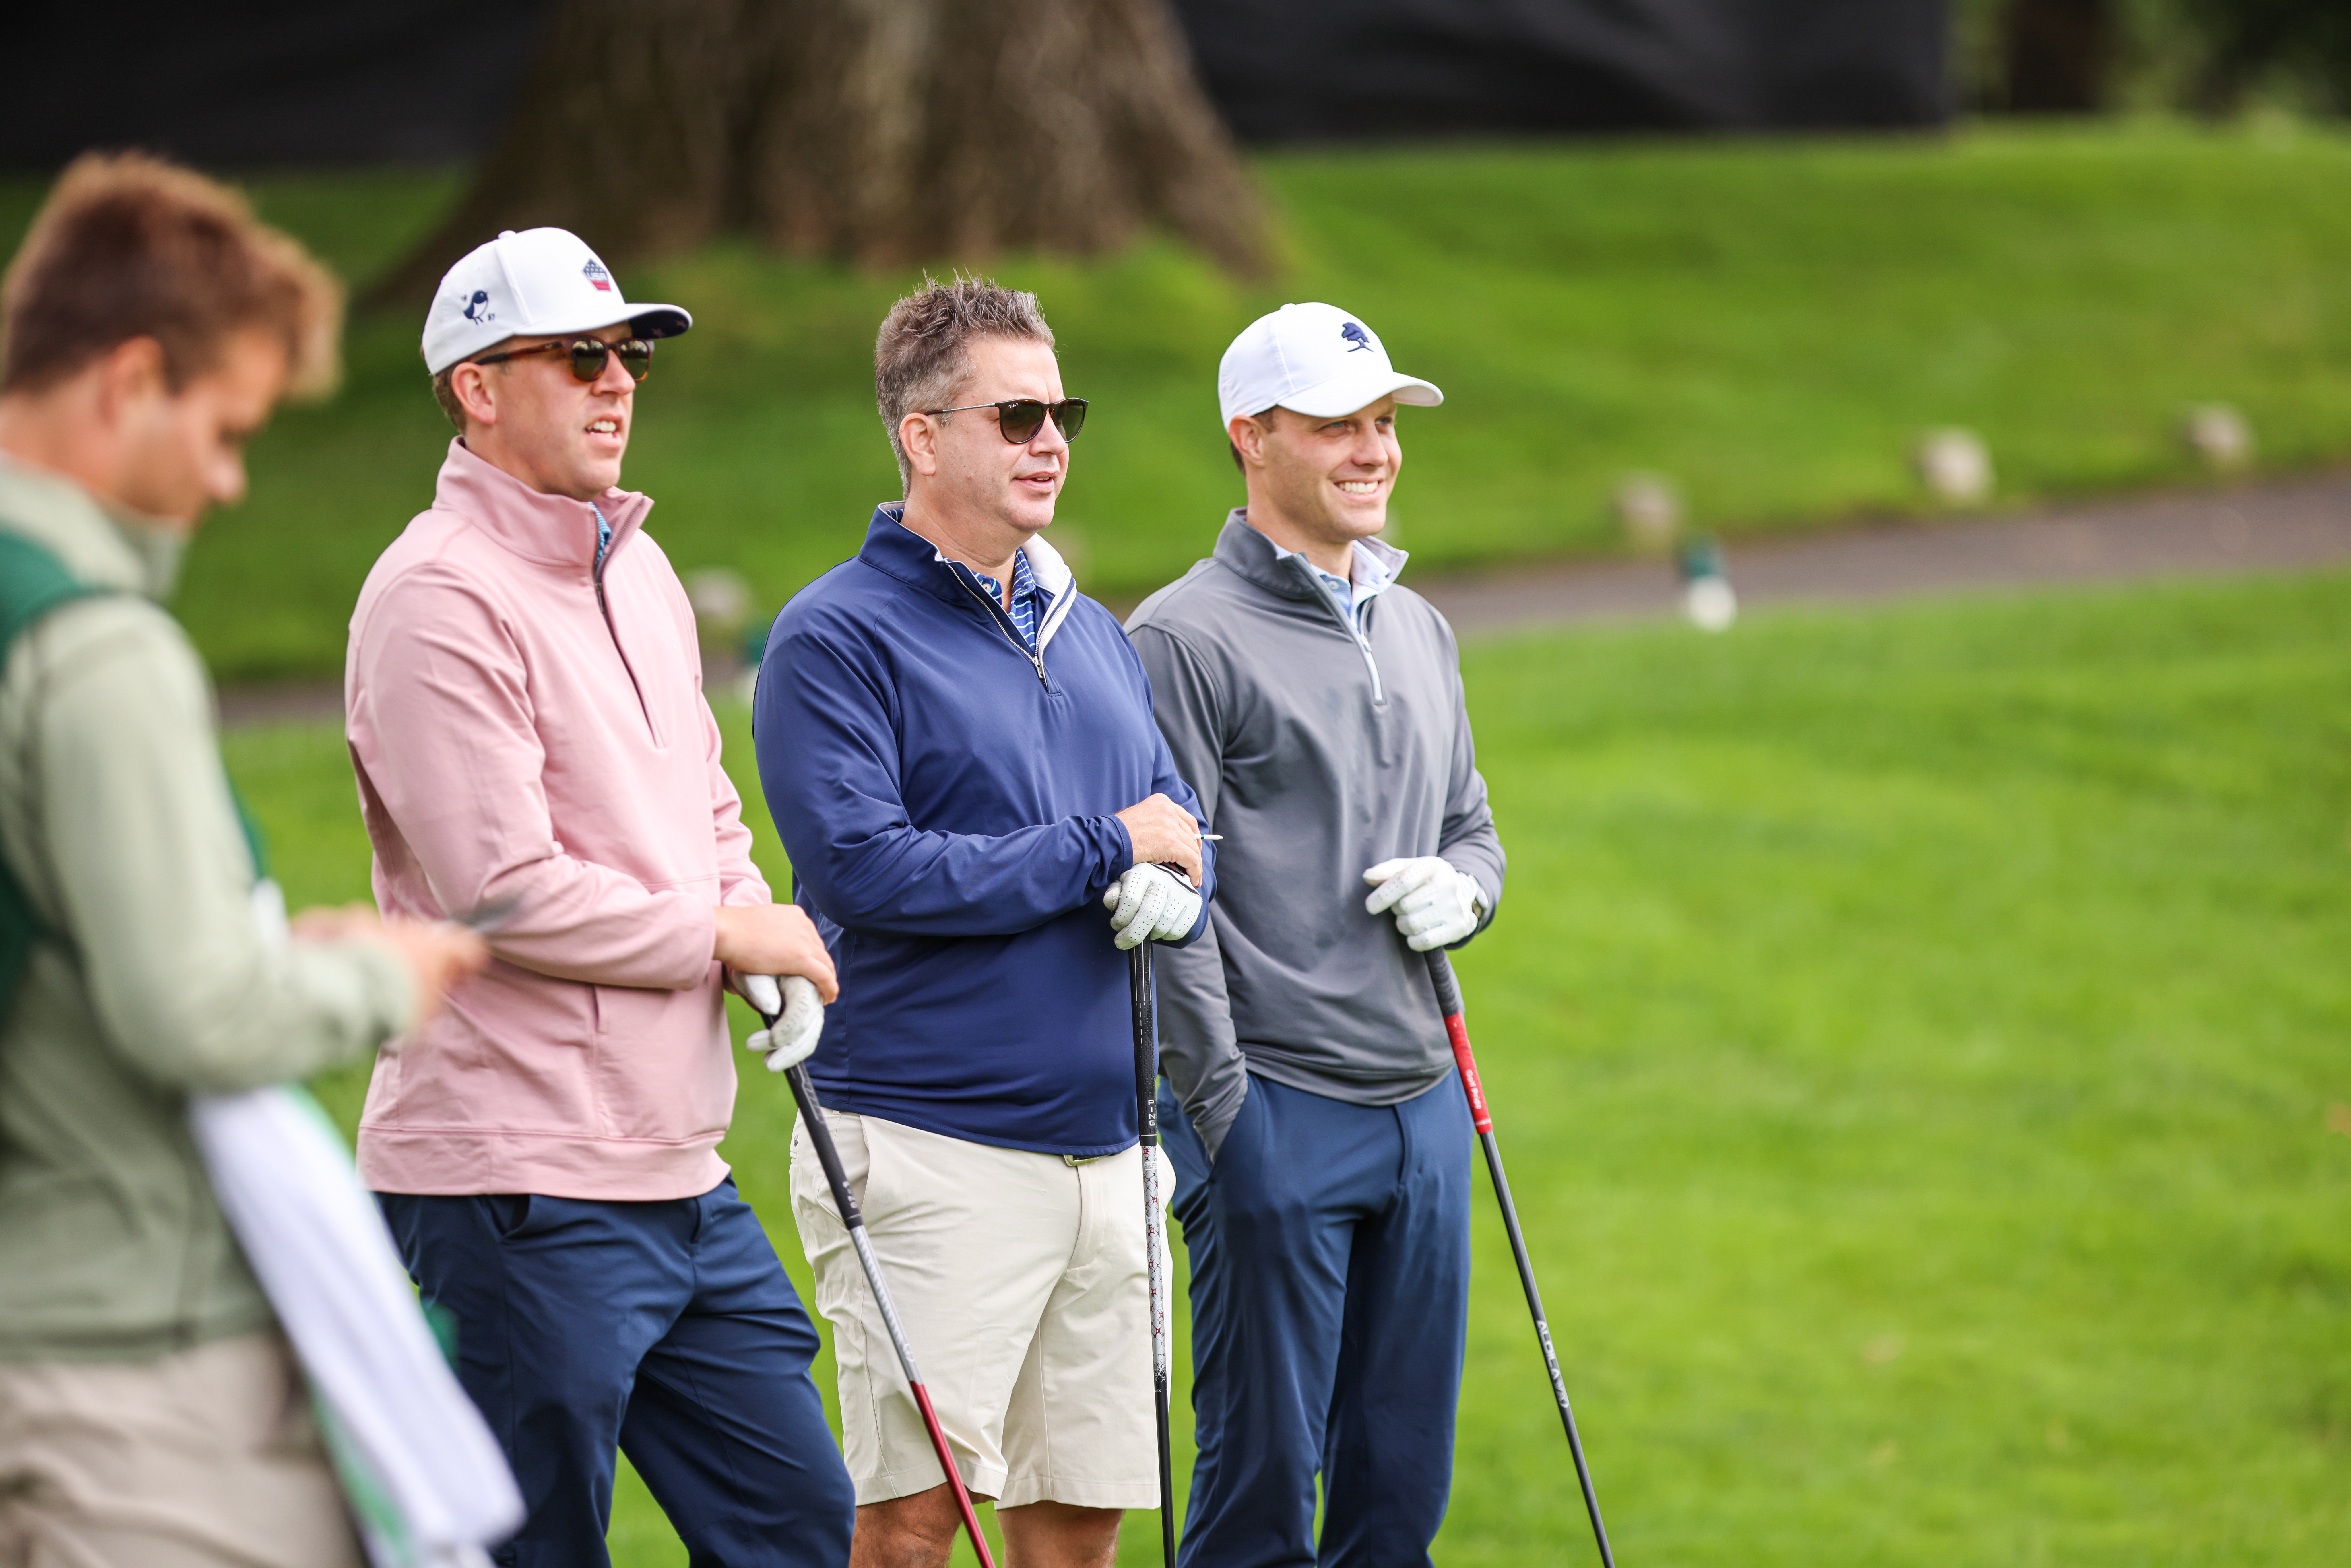 PGA of America’s Charitable Foundation — PGA REACH —  Hosted a Charity Pro-Am at Oak Hill Country Club on Sept. 22 